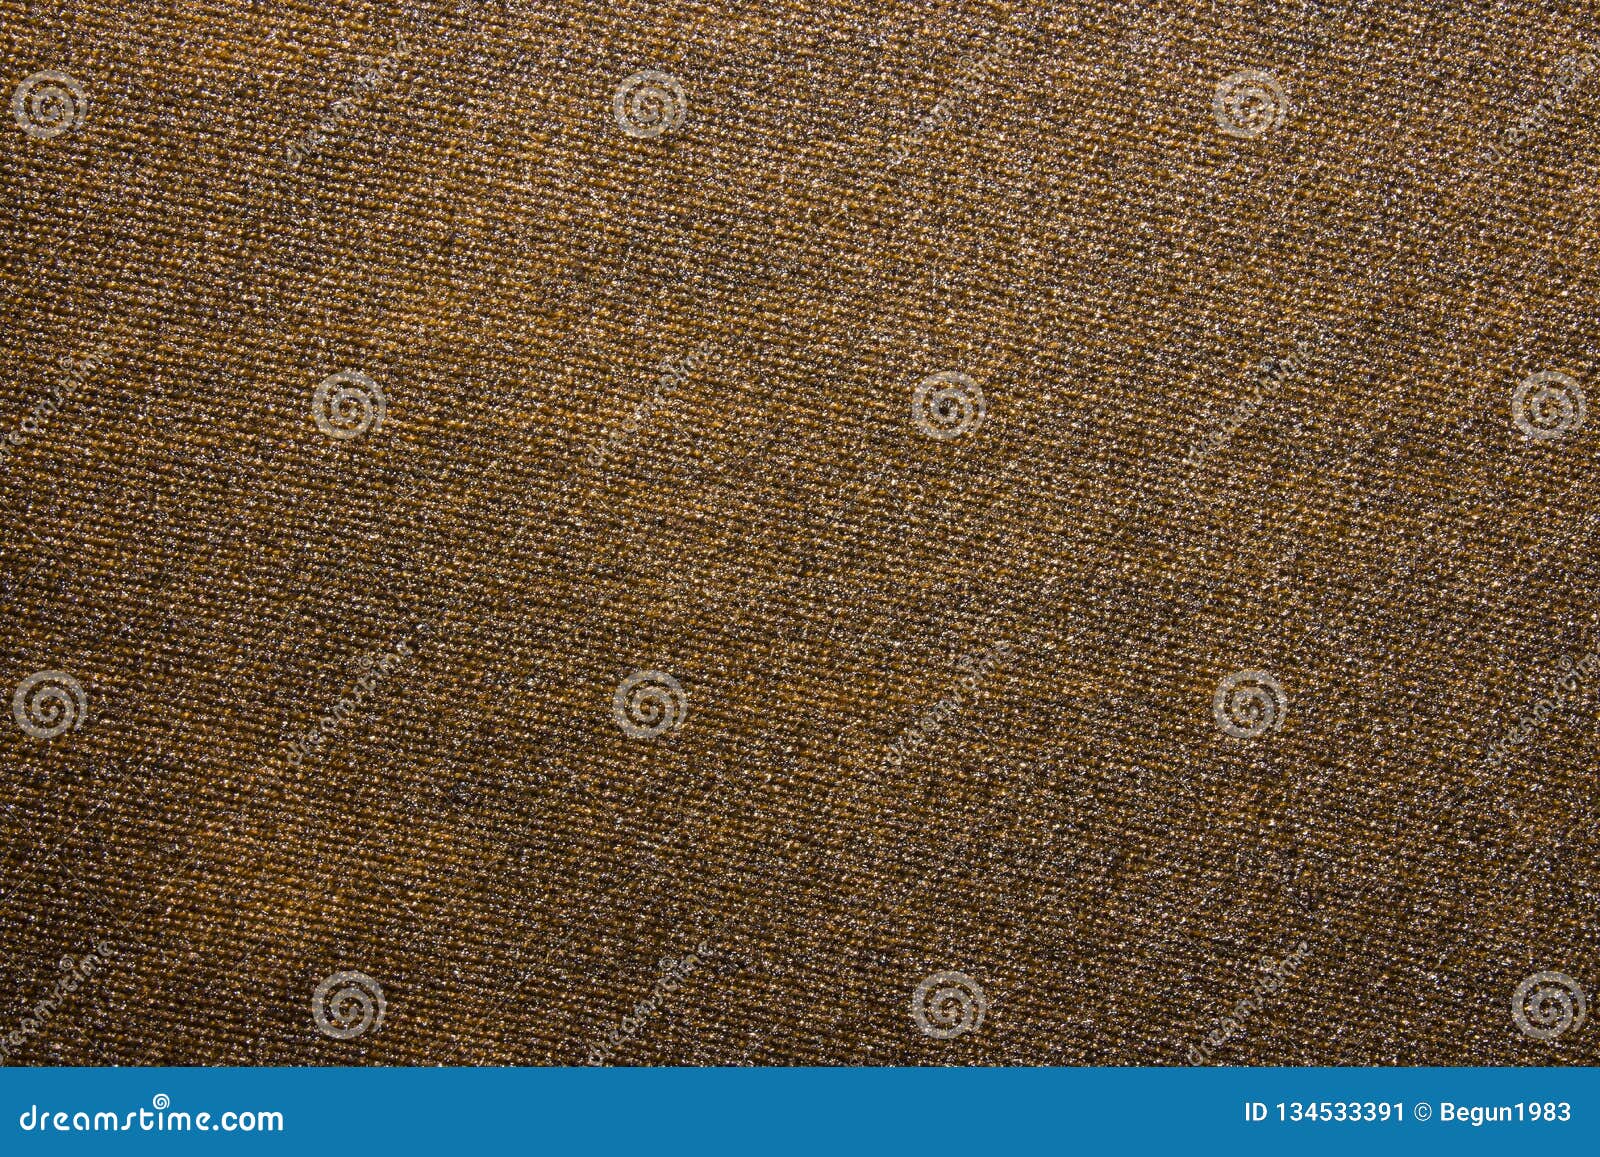 Denim brown texture. stock image. Image of dirty, fabric - 134533391